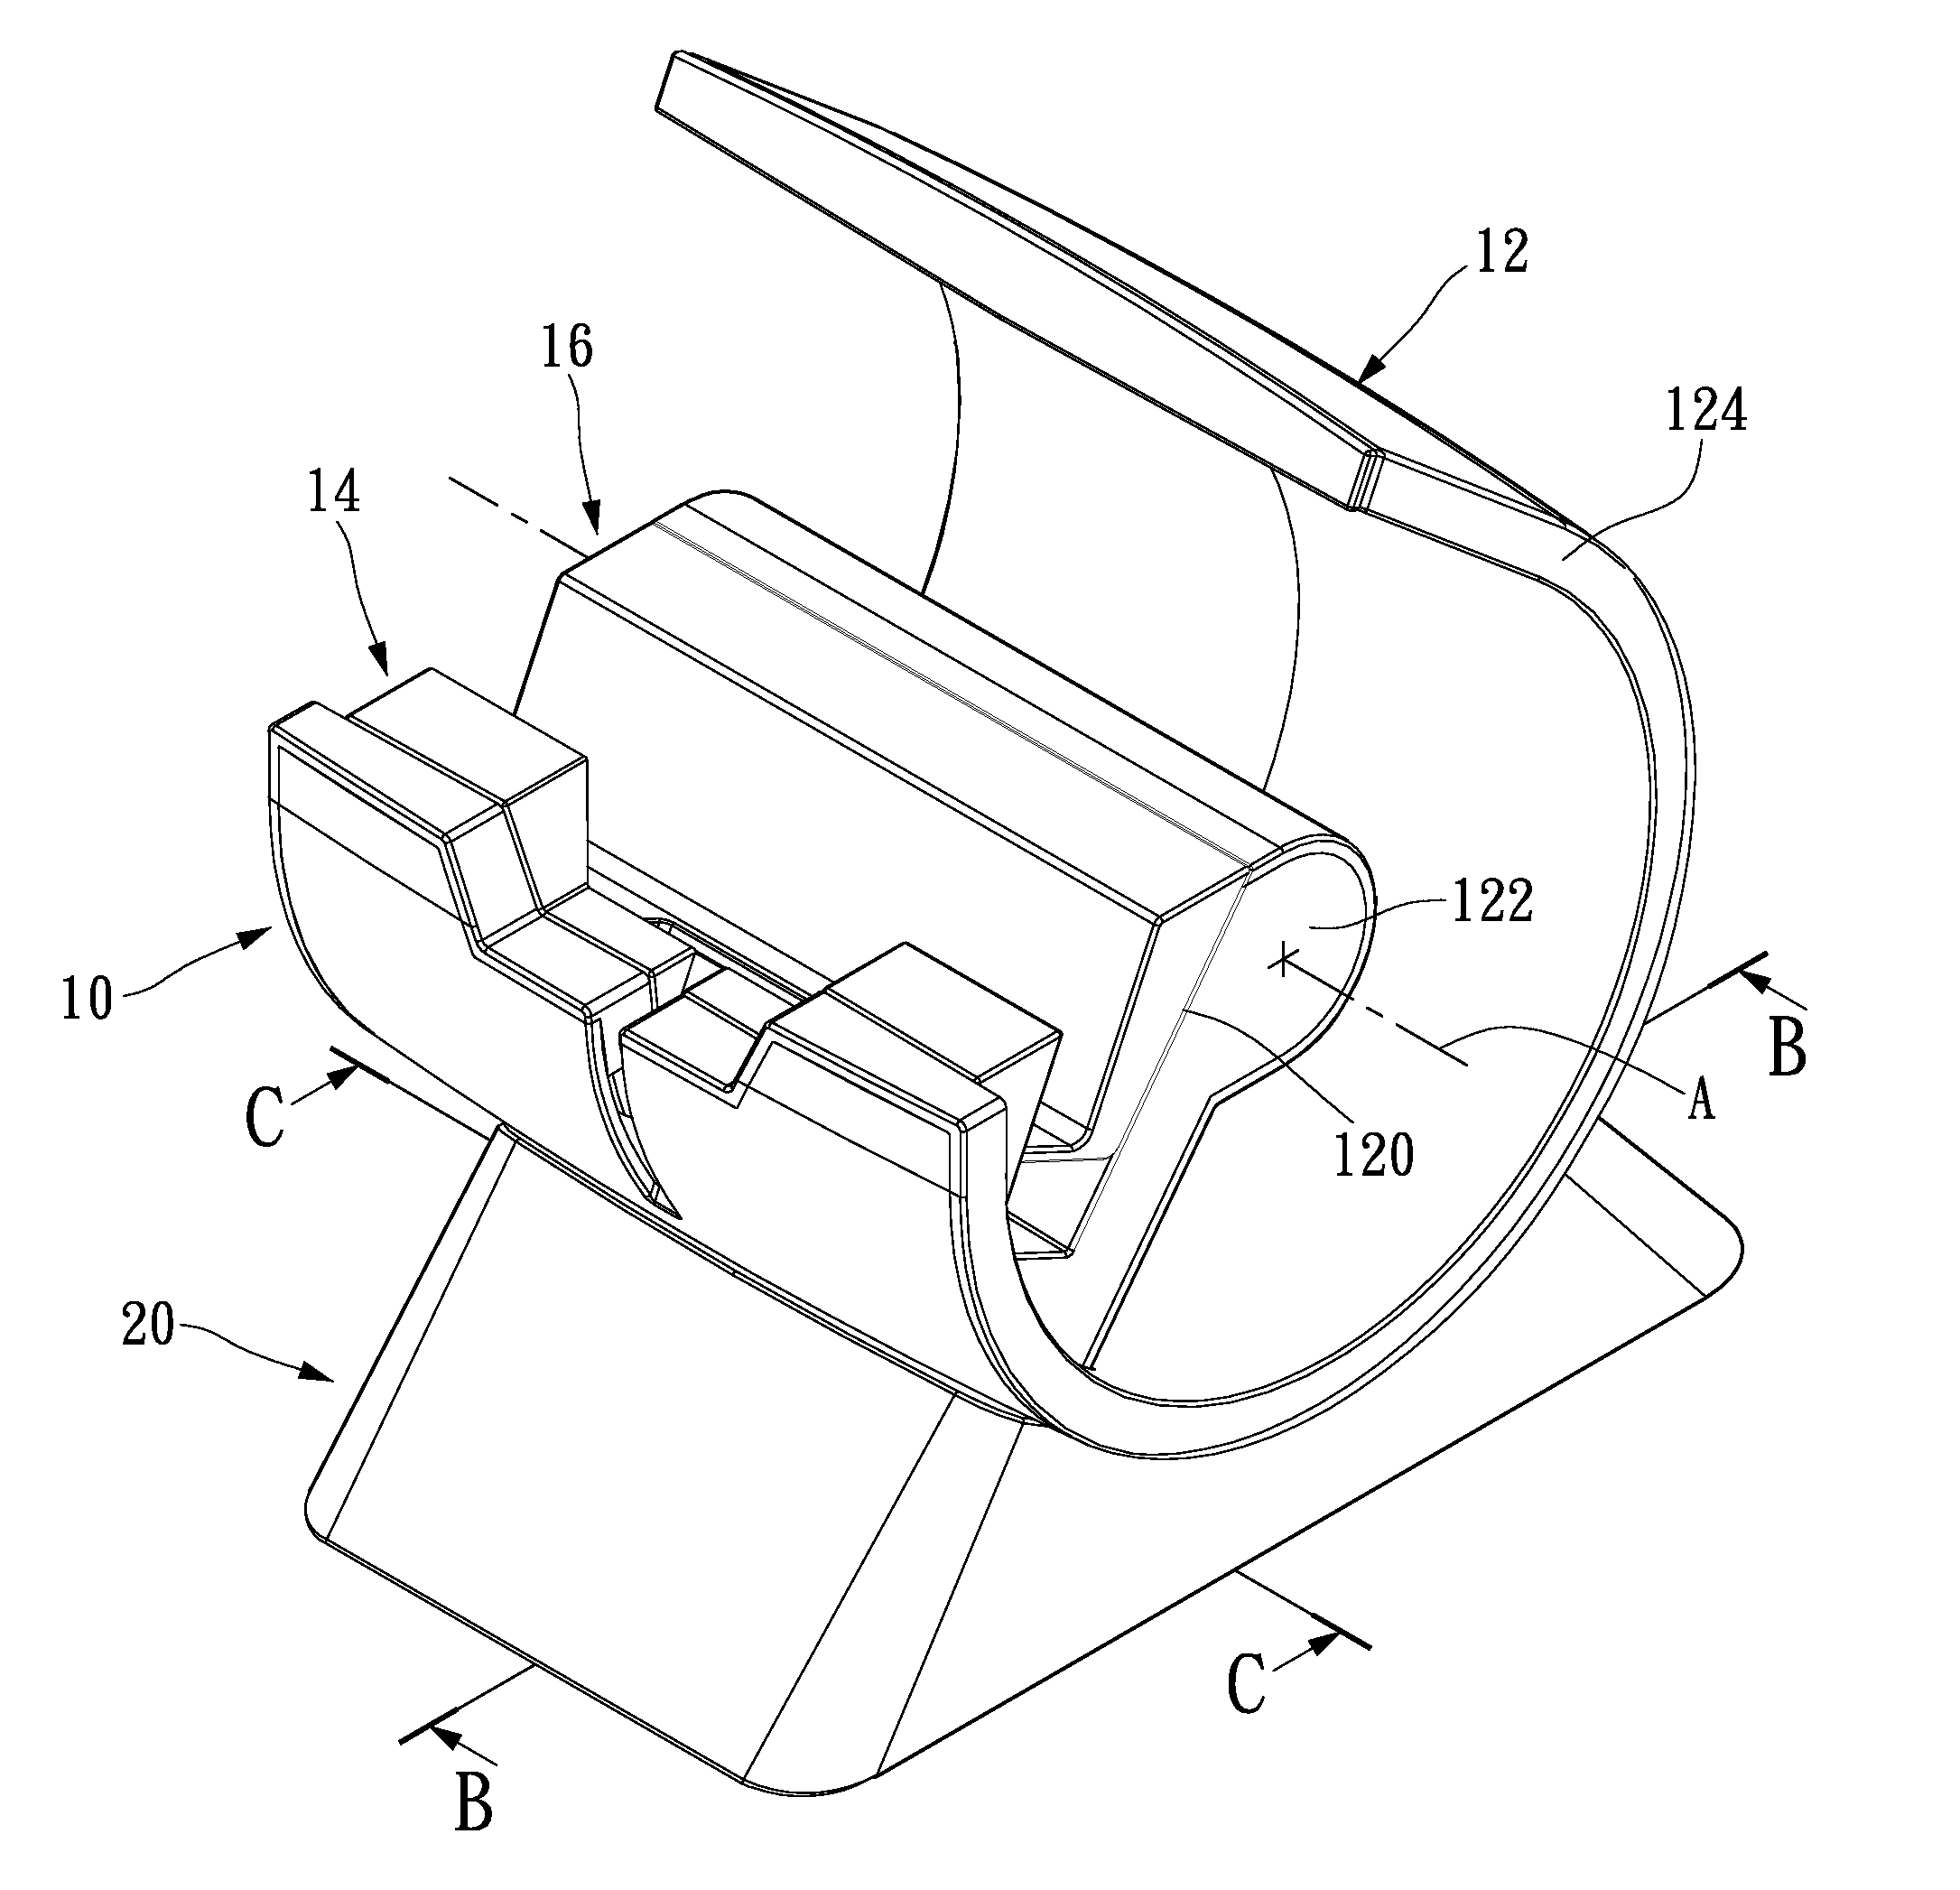 Supporting apparatus